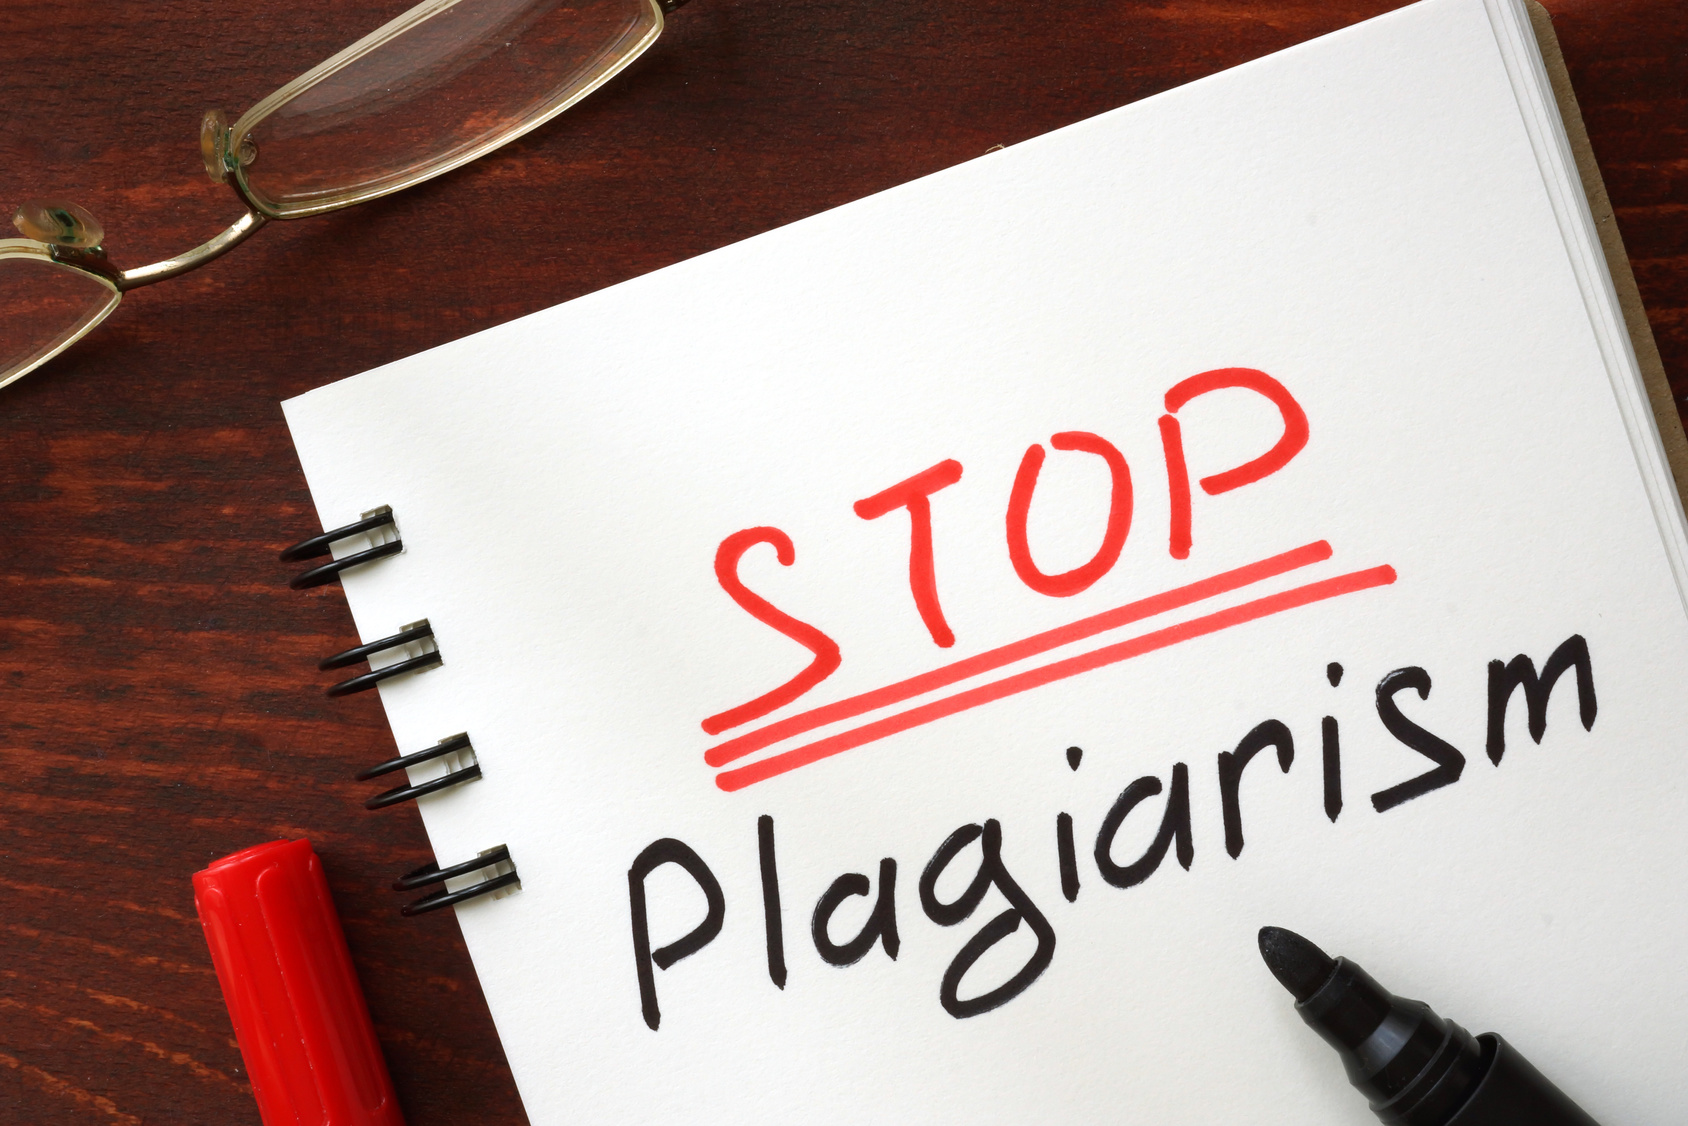 how can we avoid plagiarism in writing research paper